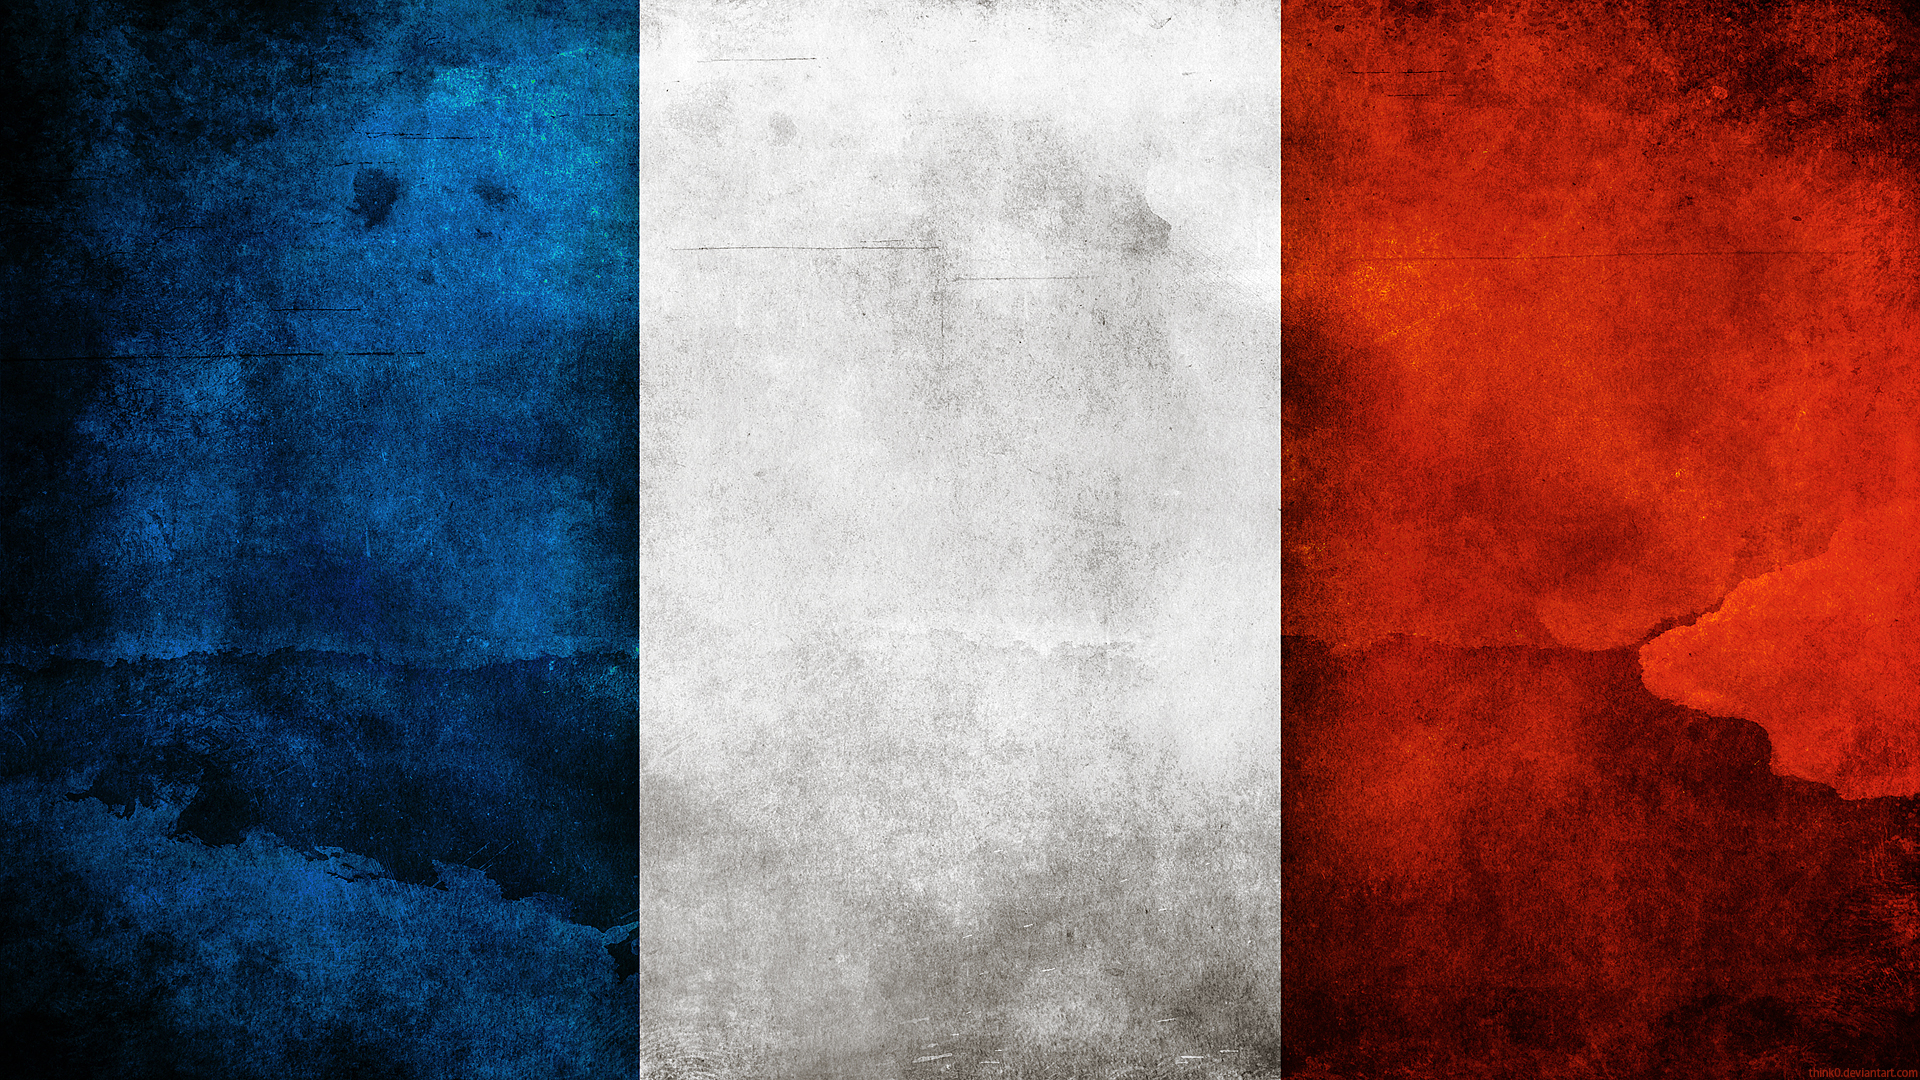 Flag Of France Pics, Misc Collection